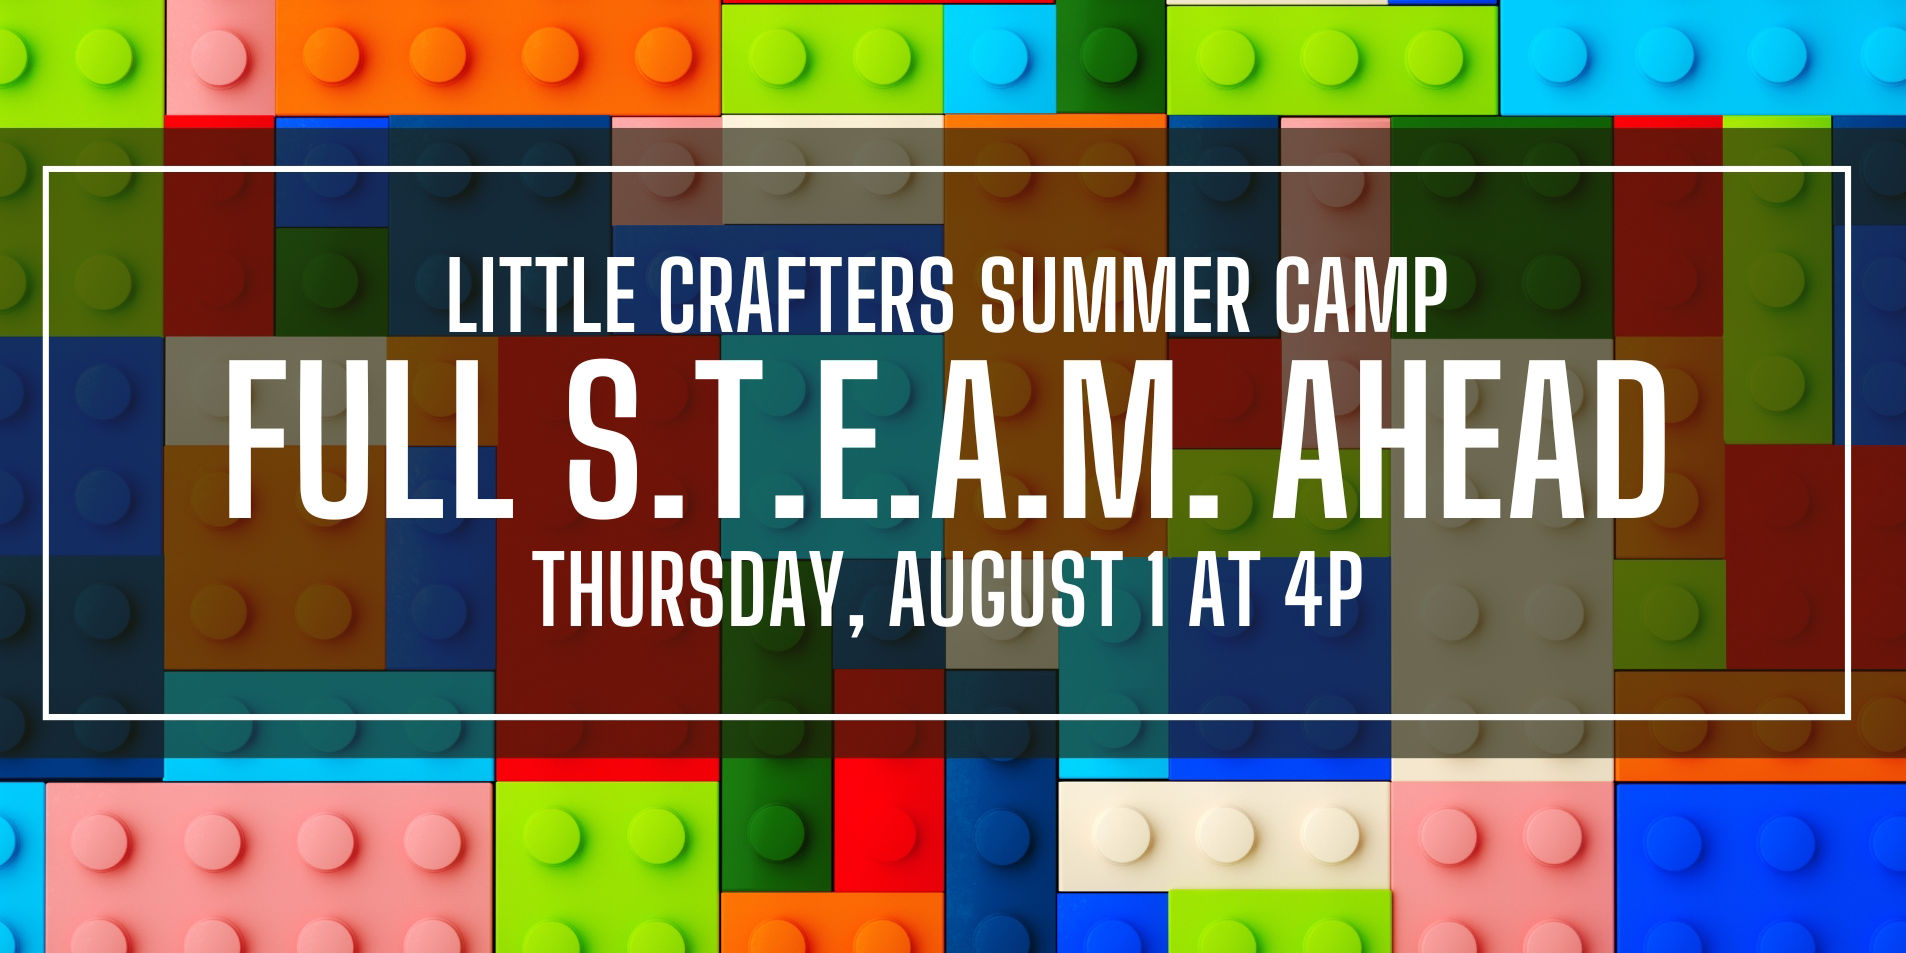 Little Crafters Summer Camp: Full S.T.E.A.M. Ahead